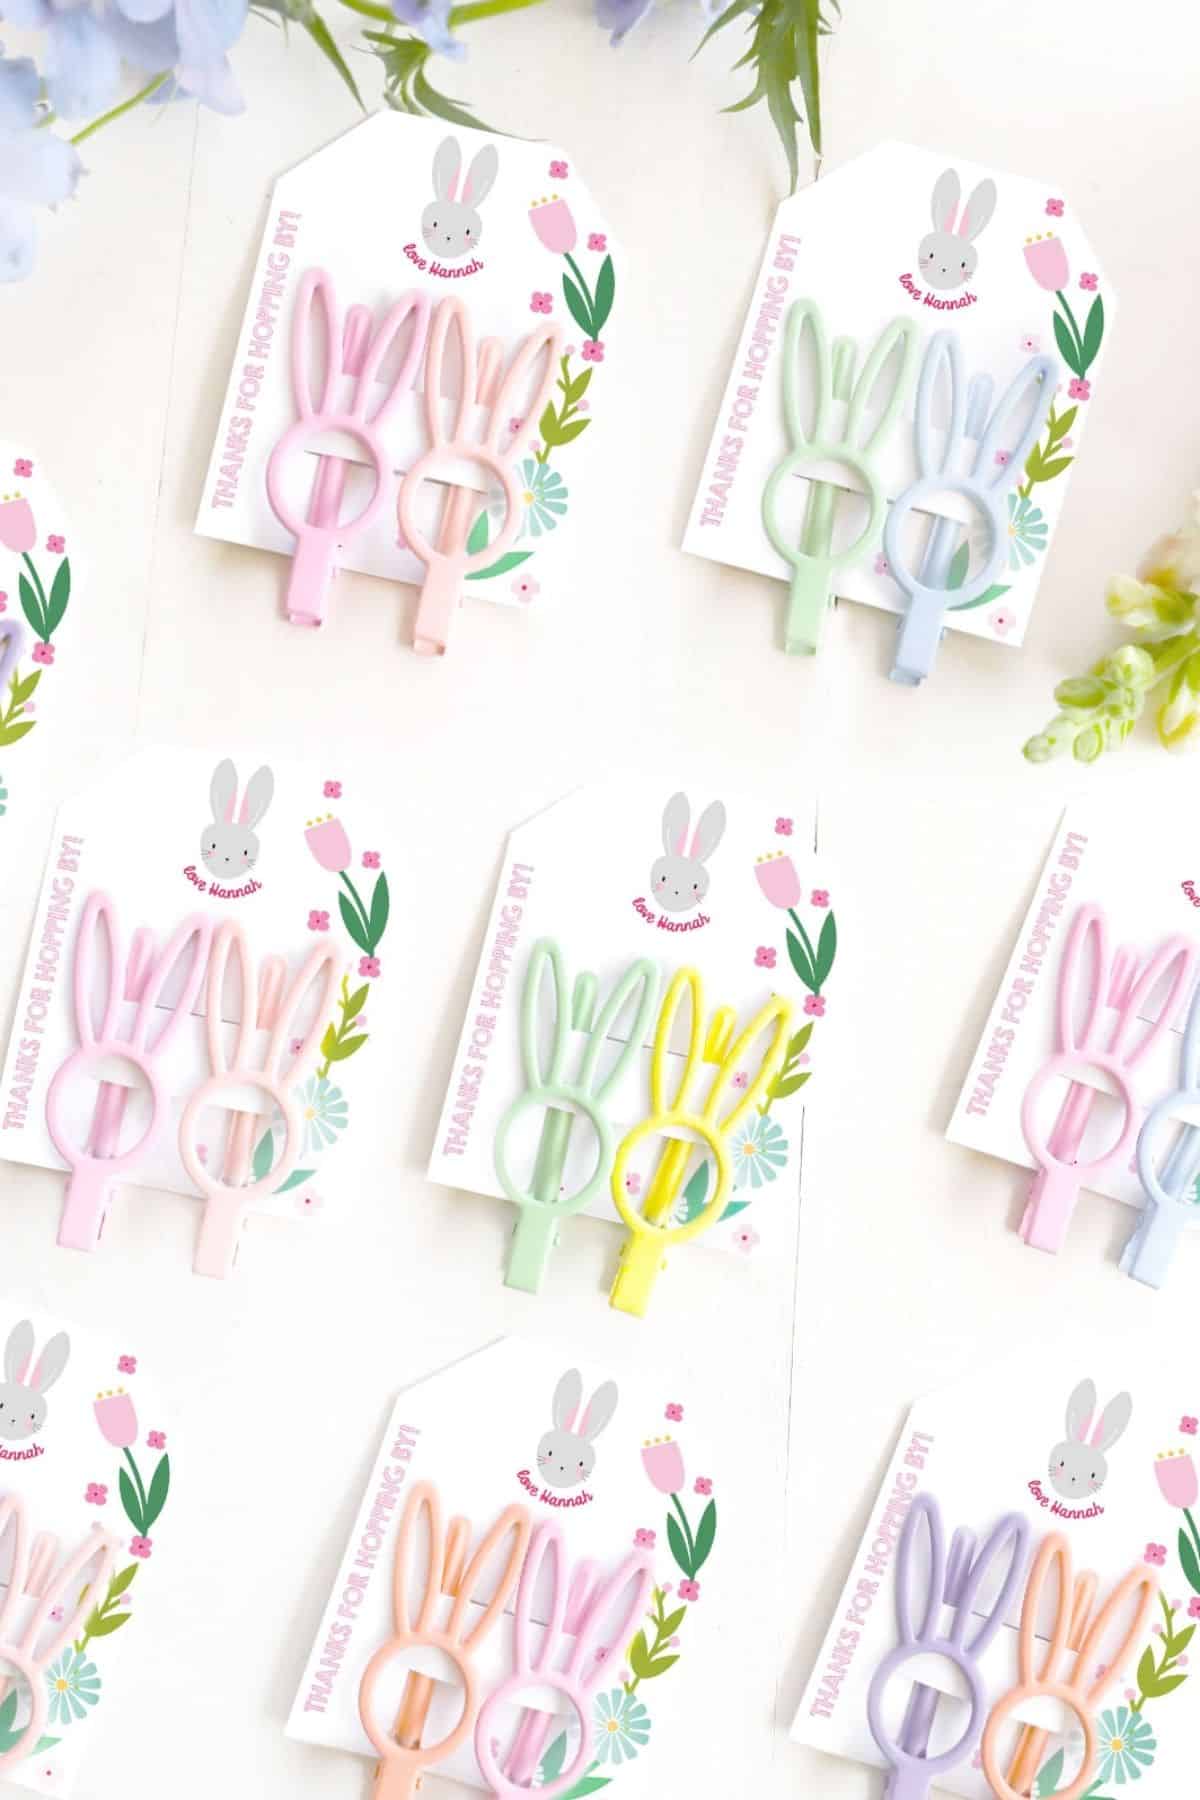 Bunny shaped hair clips for little girls as a party favor.